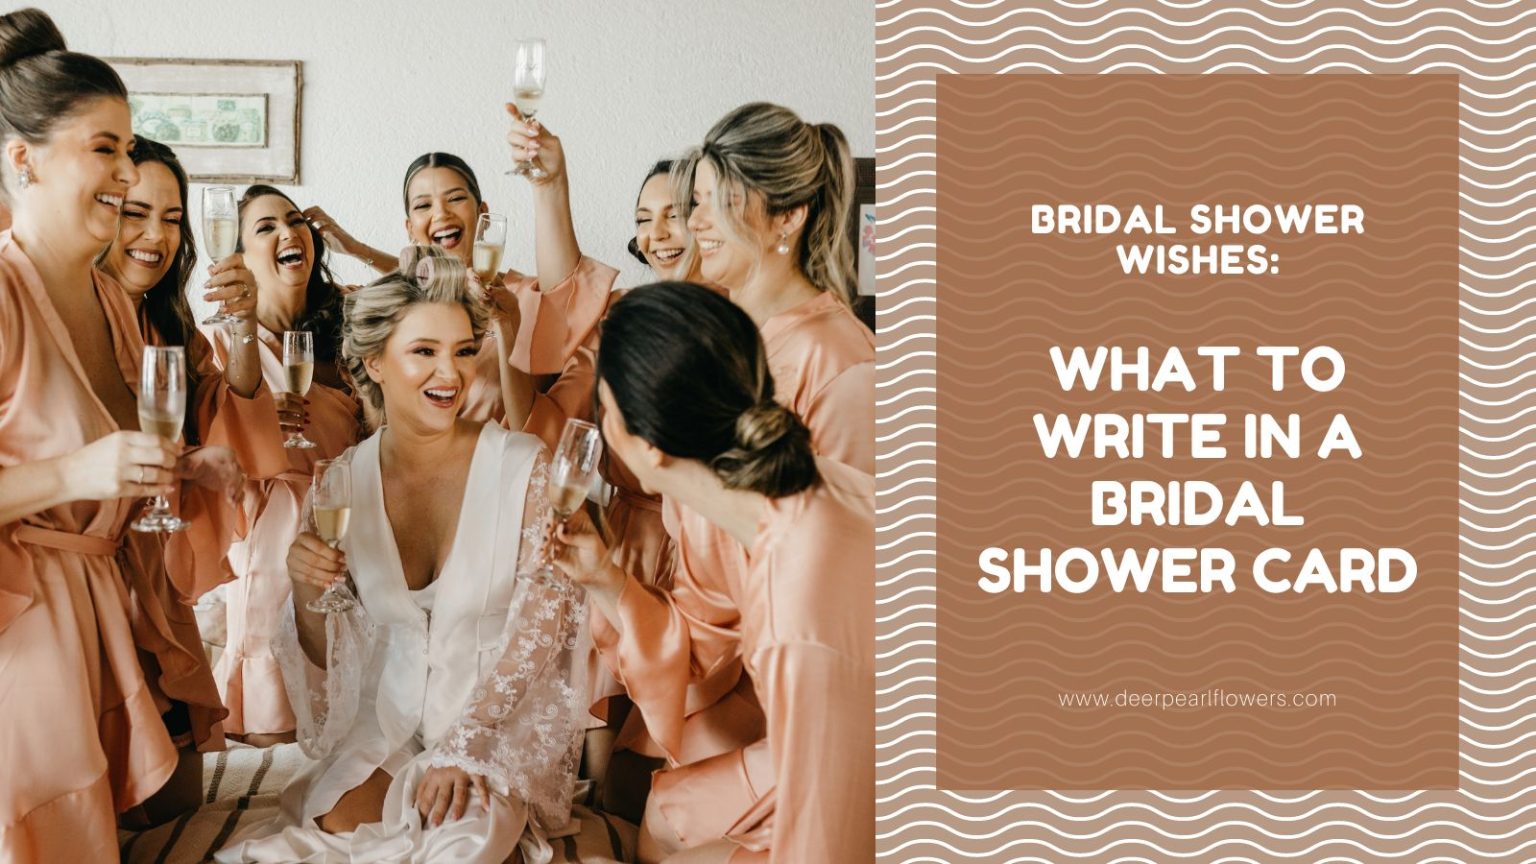 What To Write In A Bridal Shower Card 1536x864 